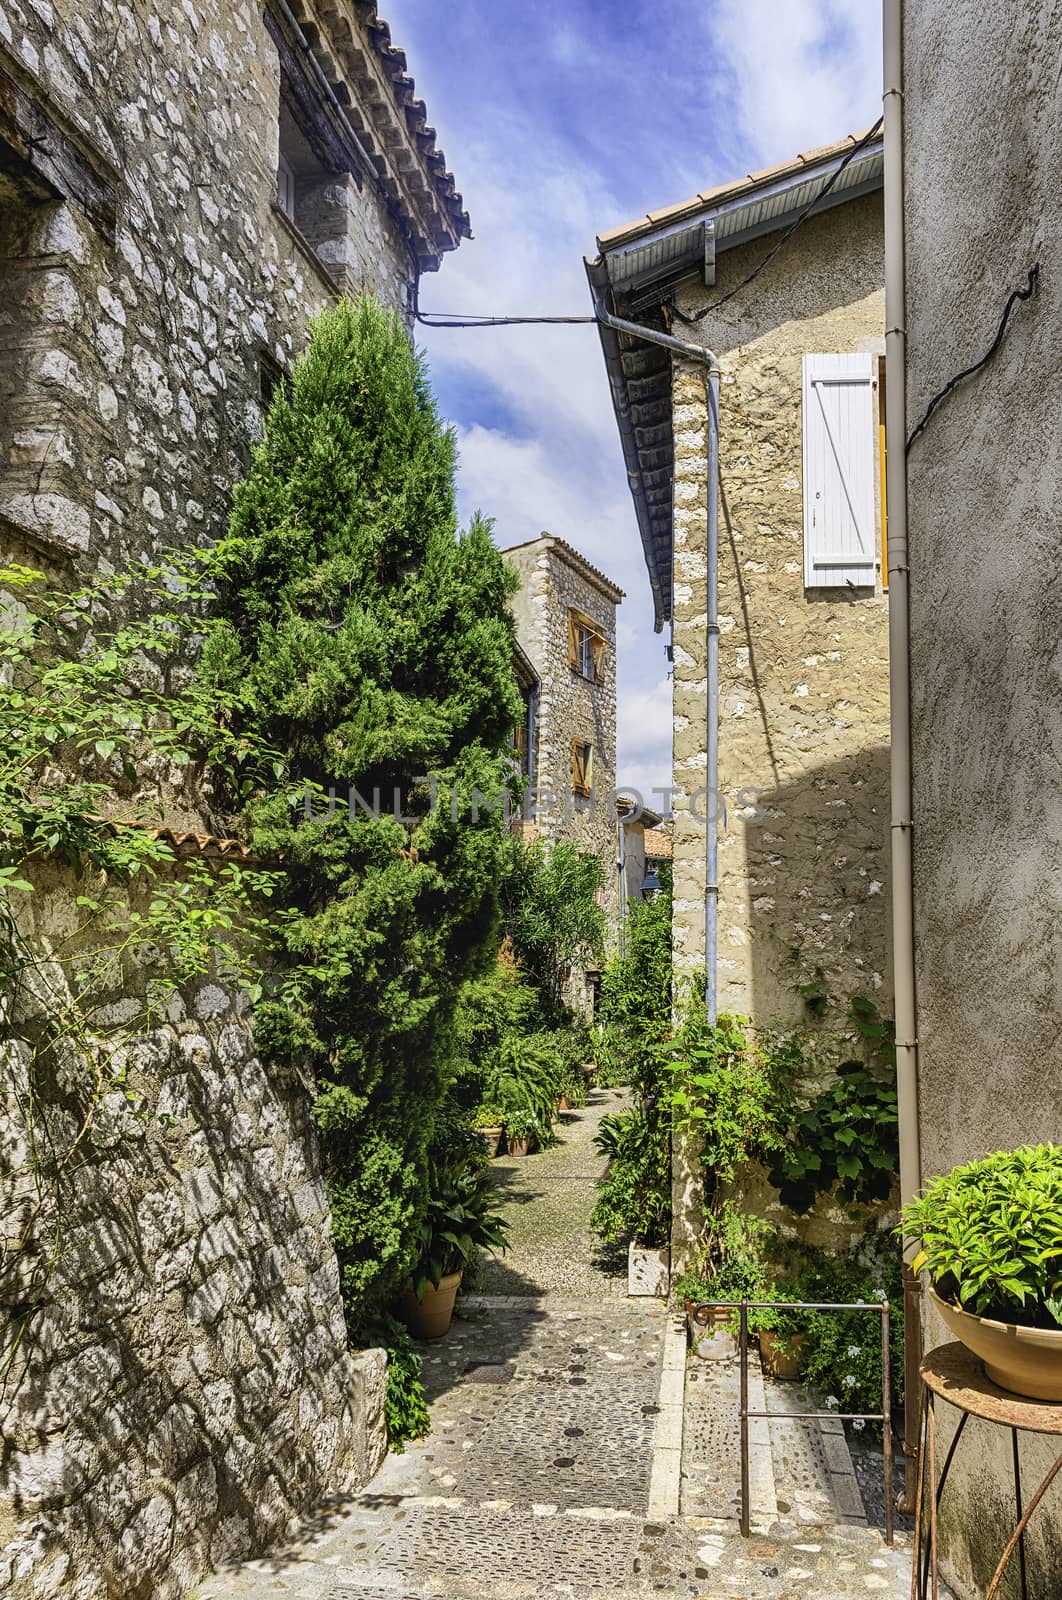 Walking in the picturesque streets of Saint-Paul-de-Vence, Cote d'Azur, France. It is one of the oldest medieval towns on the French Riviera